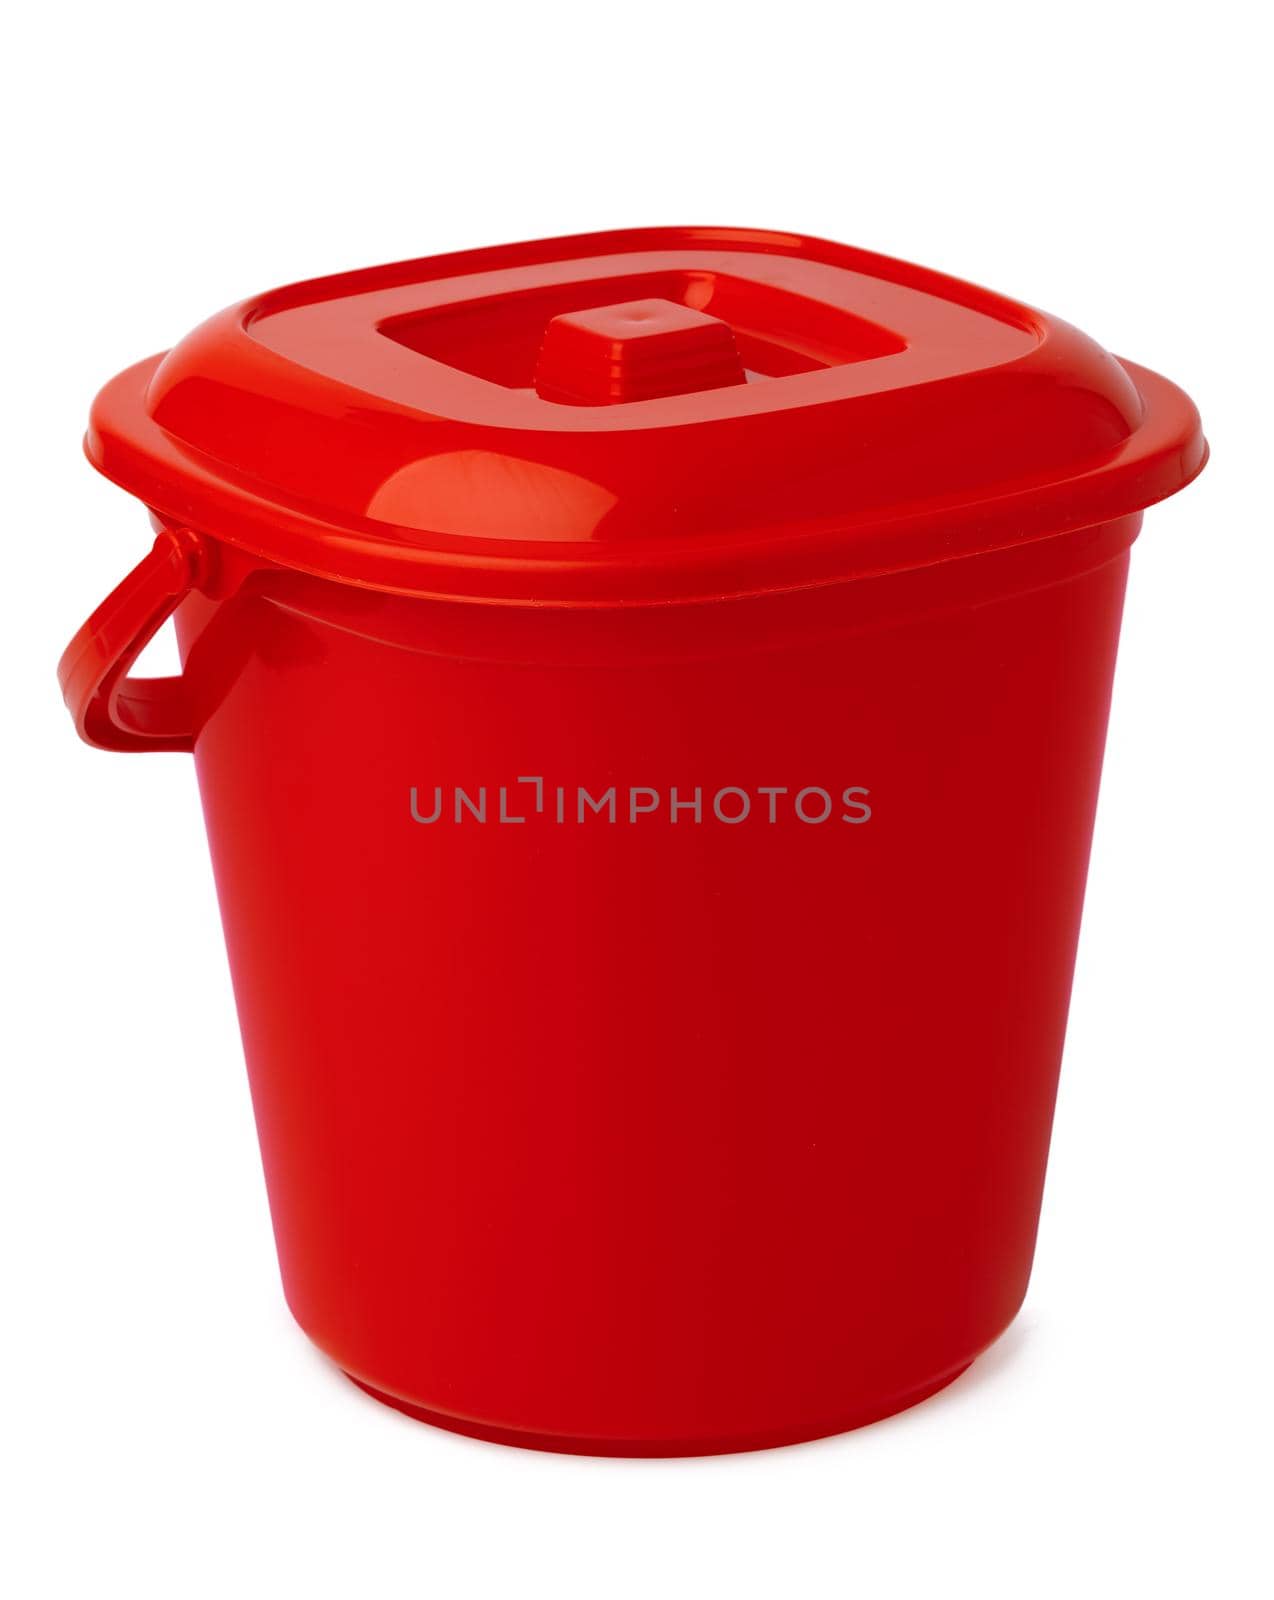 Single plastic bucket isolated on a white background by Fabrikasimf